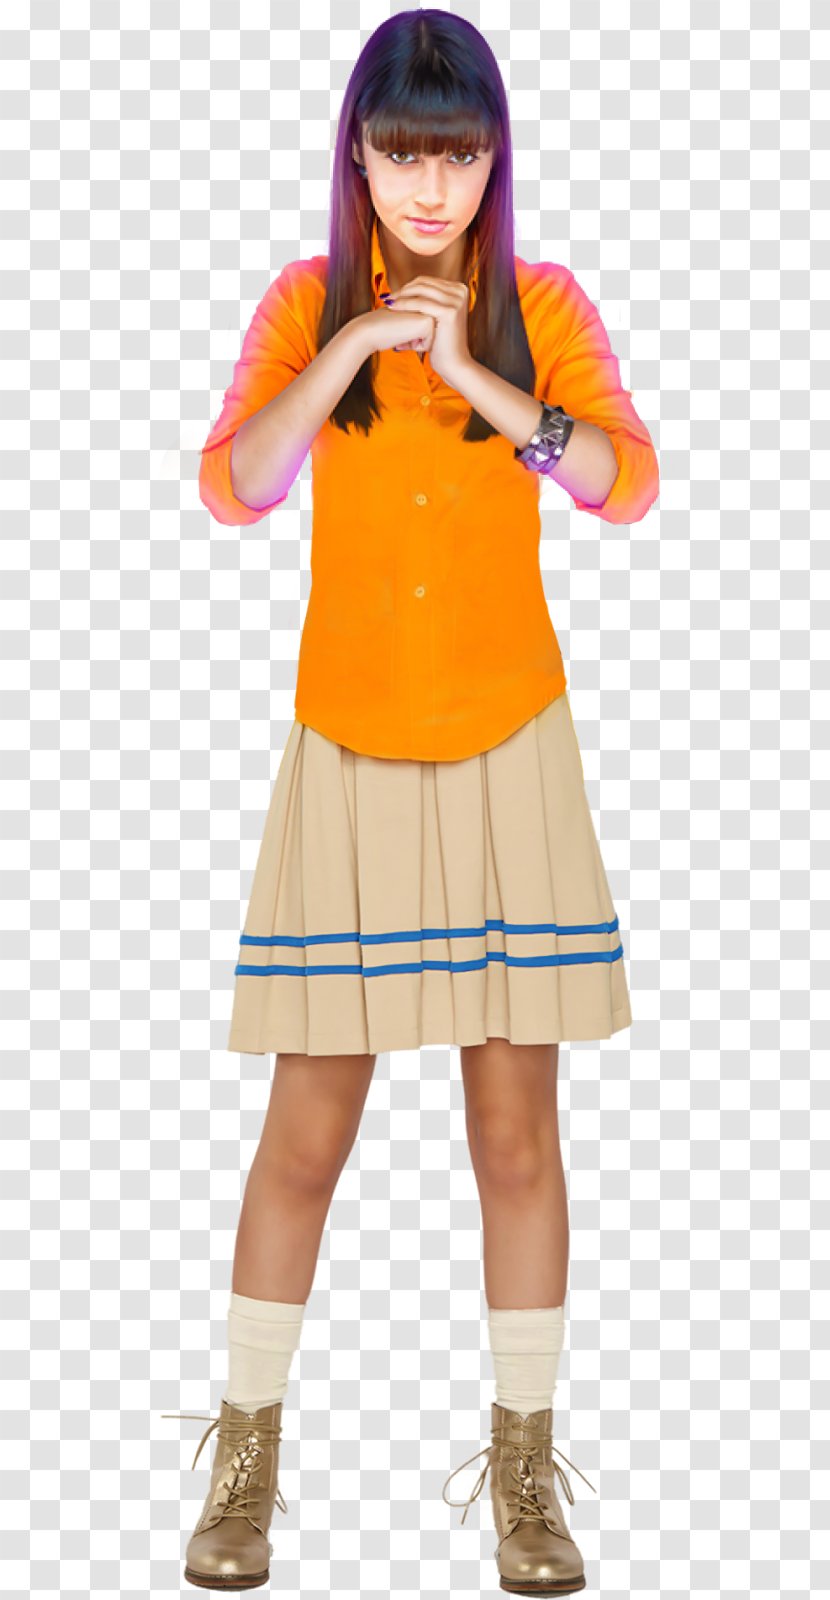 Every Witch Way - Watercolor - Season 2 WaySeason 3 Nickelodeon DownloadMia And Me Transparent PNG